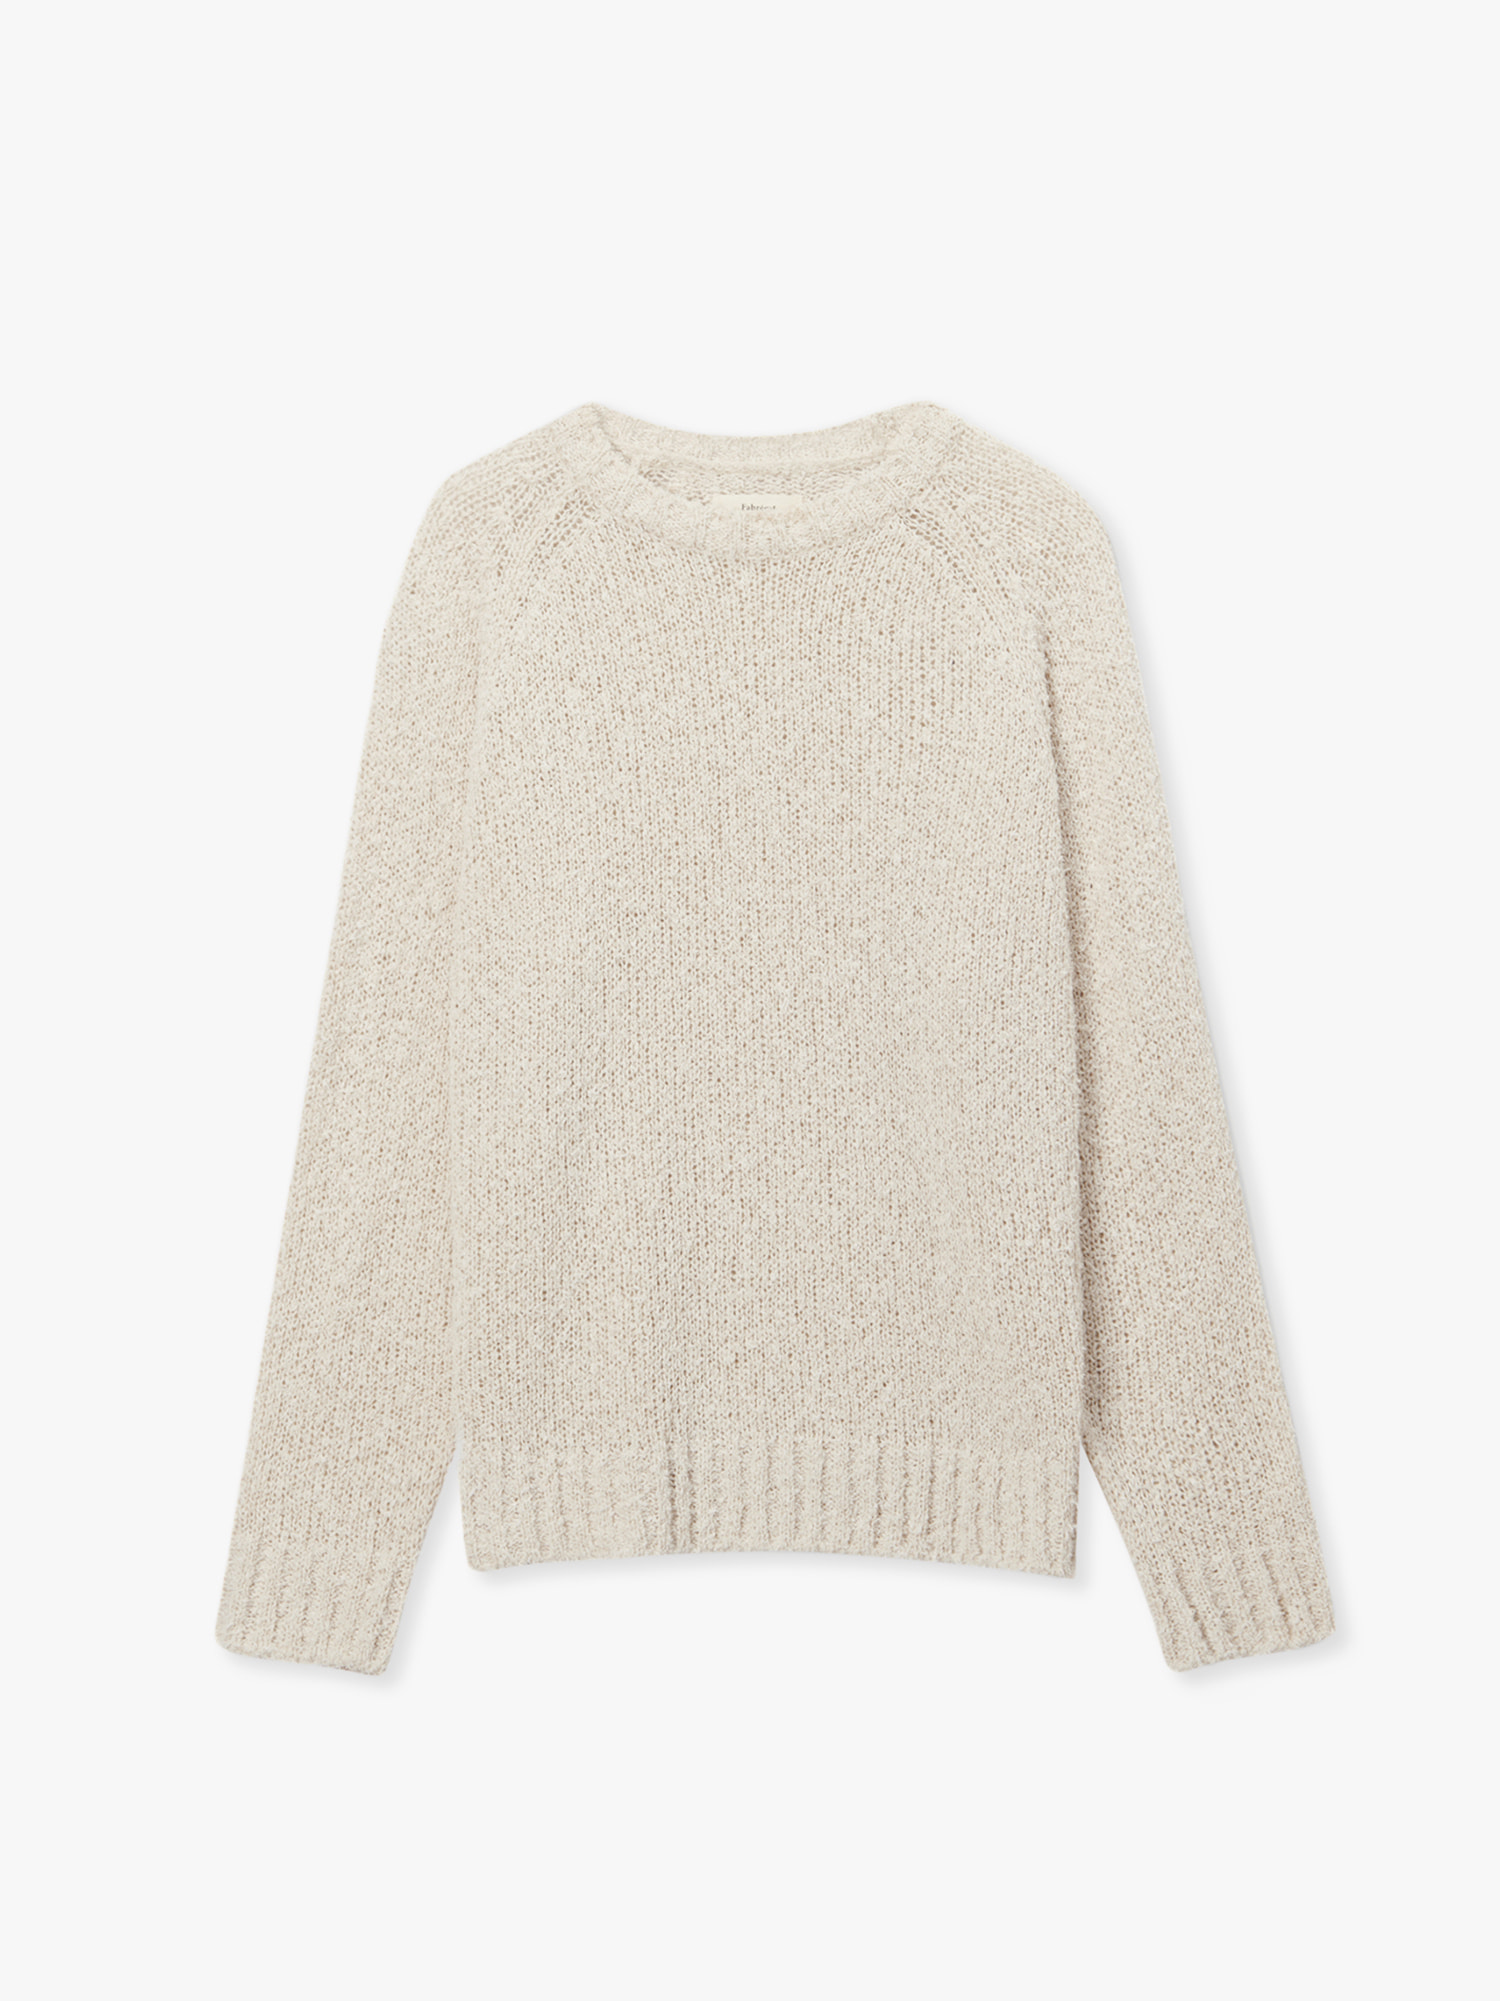 Tail Round Over-Fit Knit (Cream)